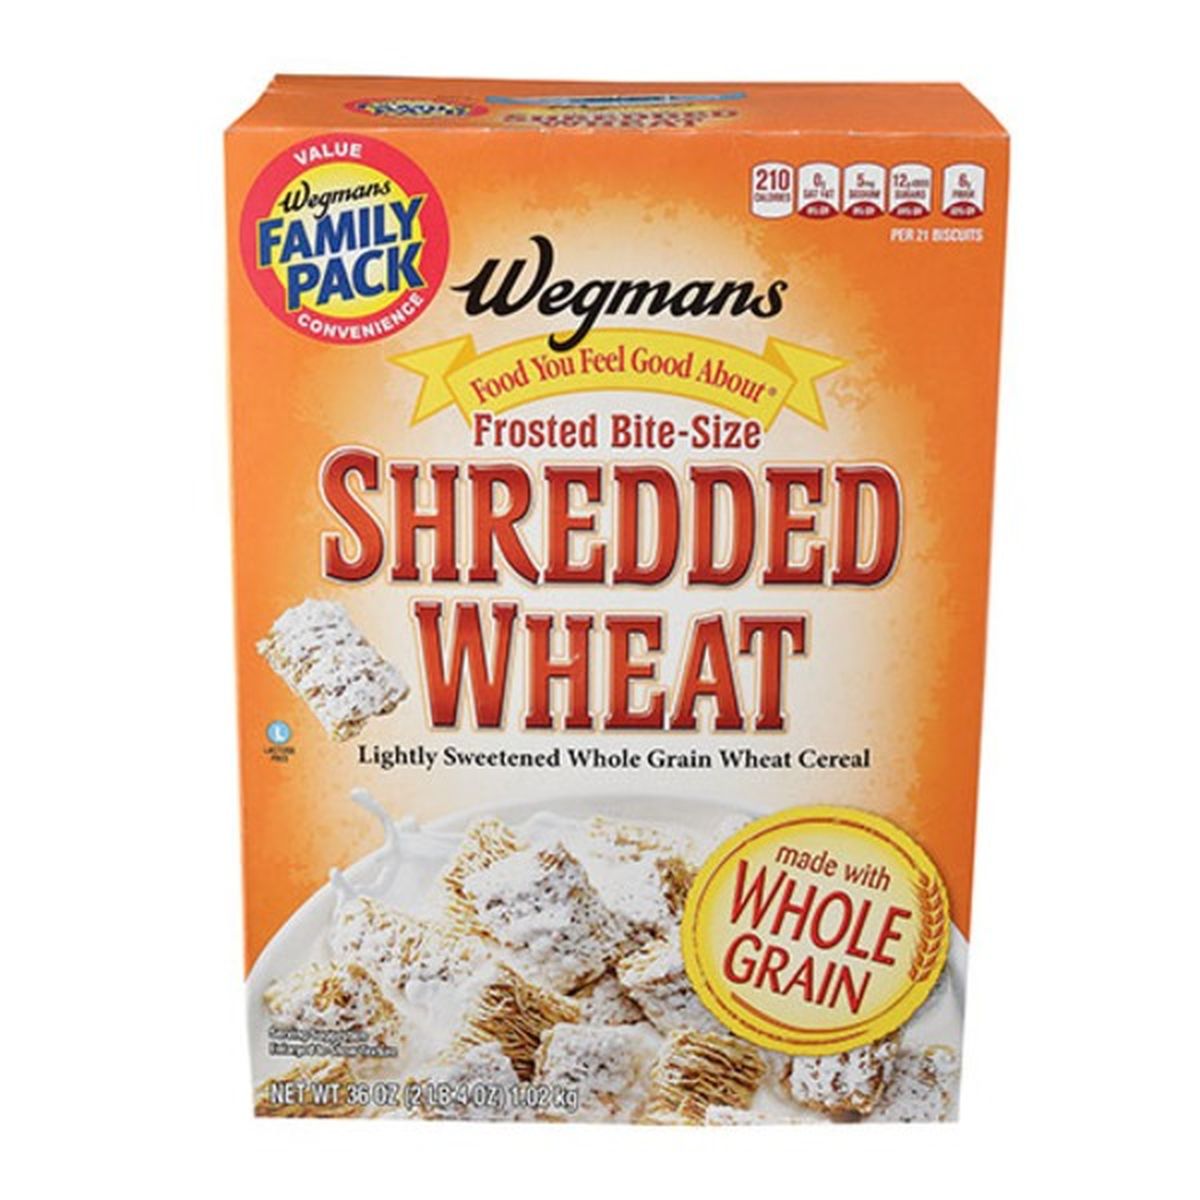 Calories in Wegmans Frosted Bite-Size Blueberry Shredded Wheat Cereal, FAMILY PACK